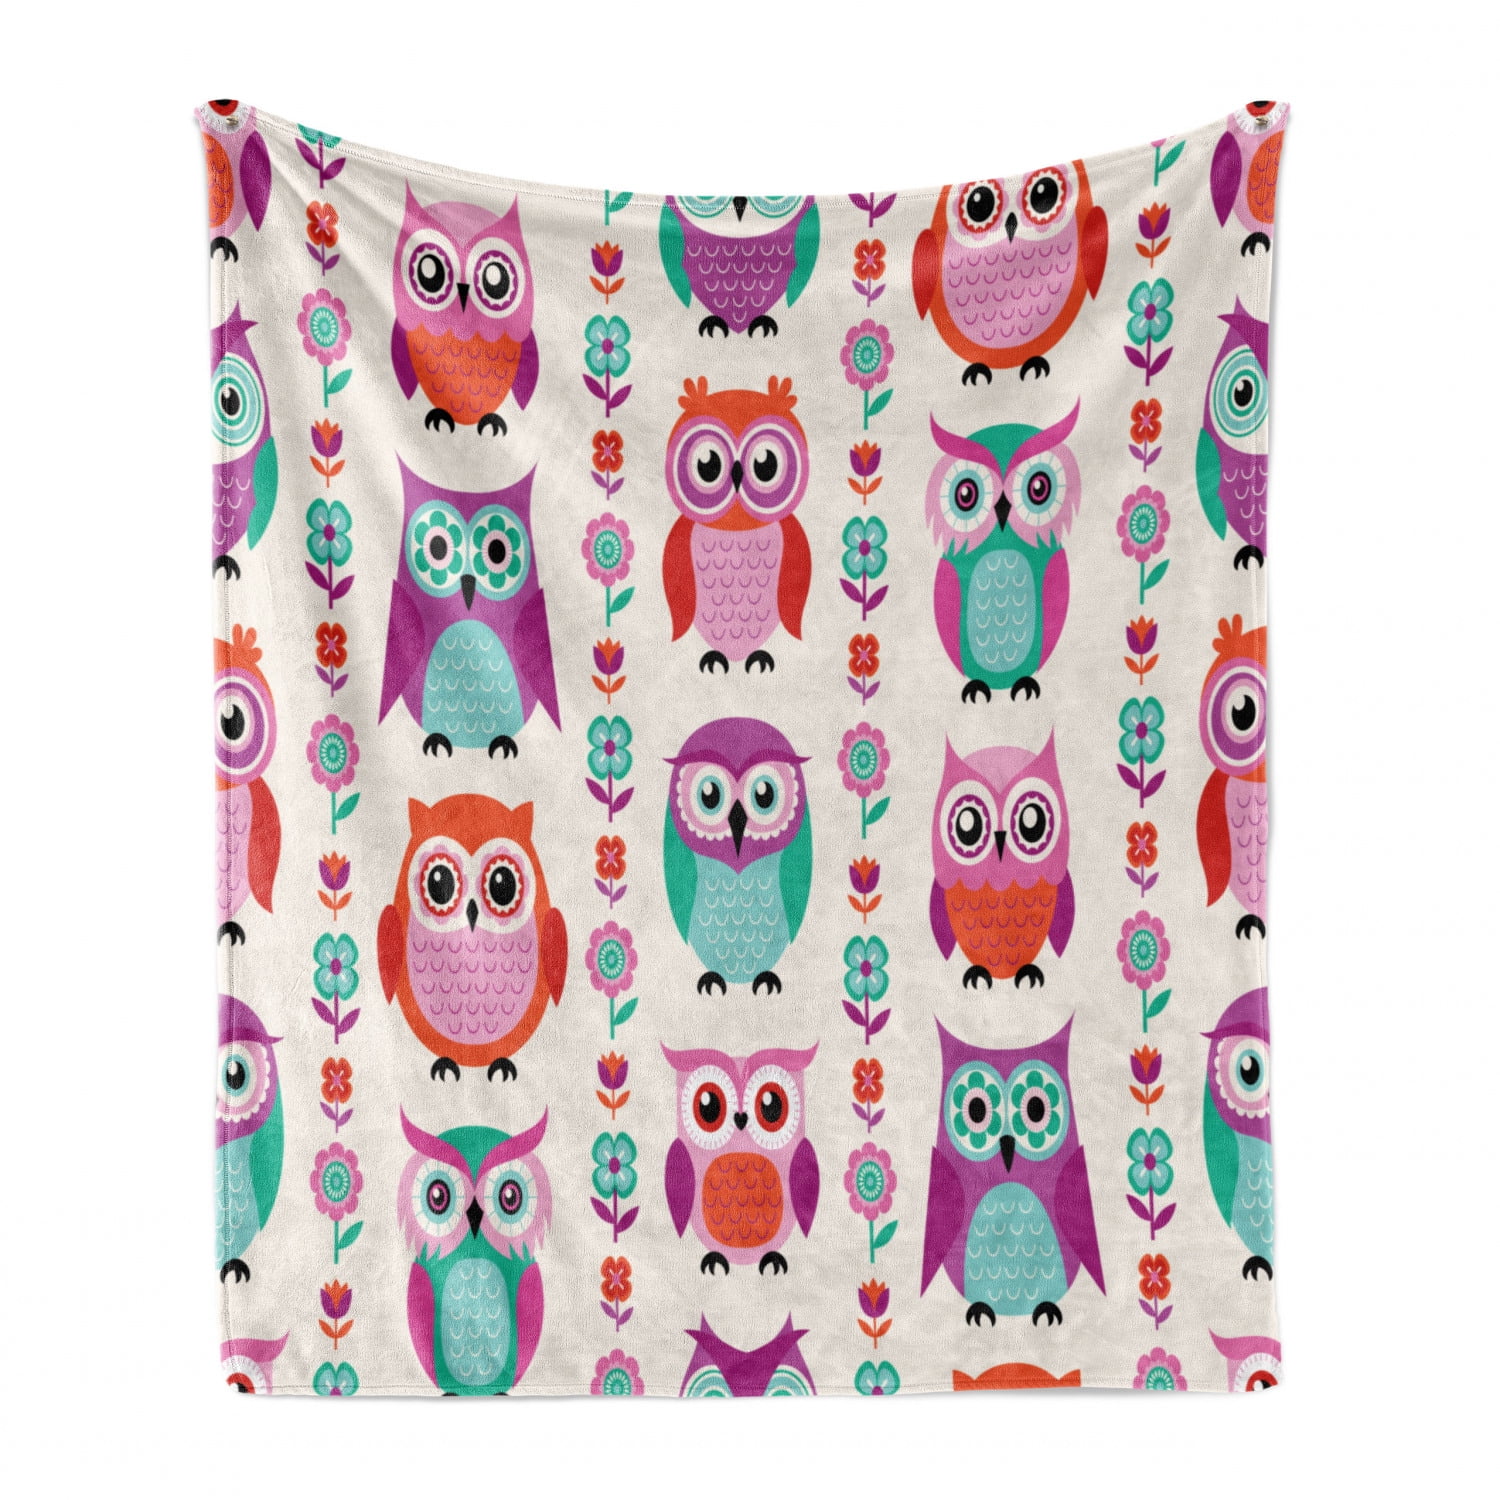 Soft Flannel Fleece Throw Blanket,Owl Art Large Flannel Fleece Blankets for Bed Couch Sofa,All Season Warm Cozy Fuzzy Lightweight Blanket for Hot Sleepers